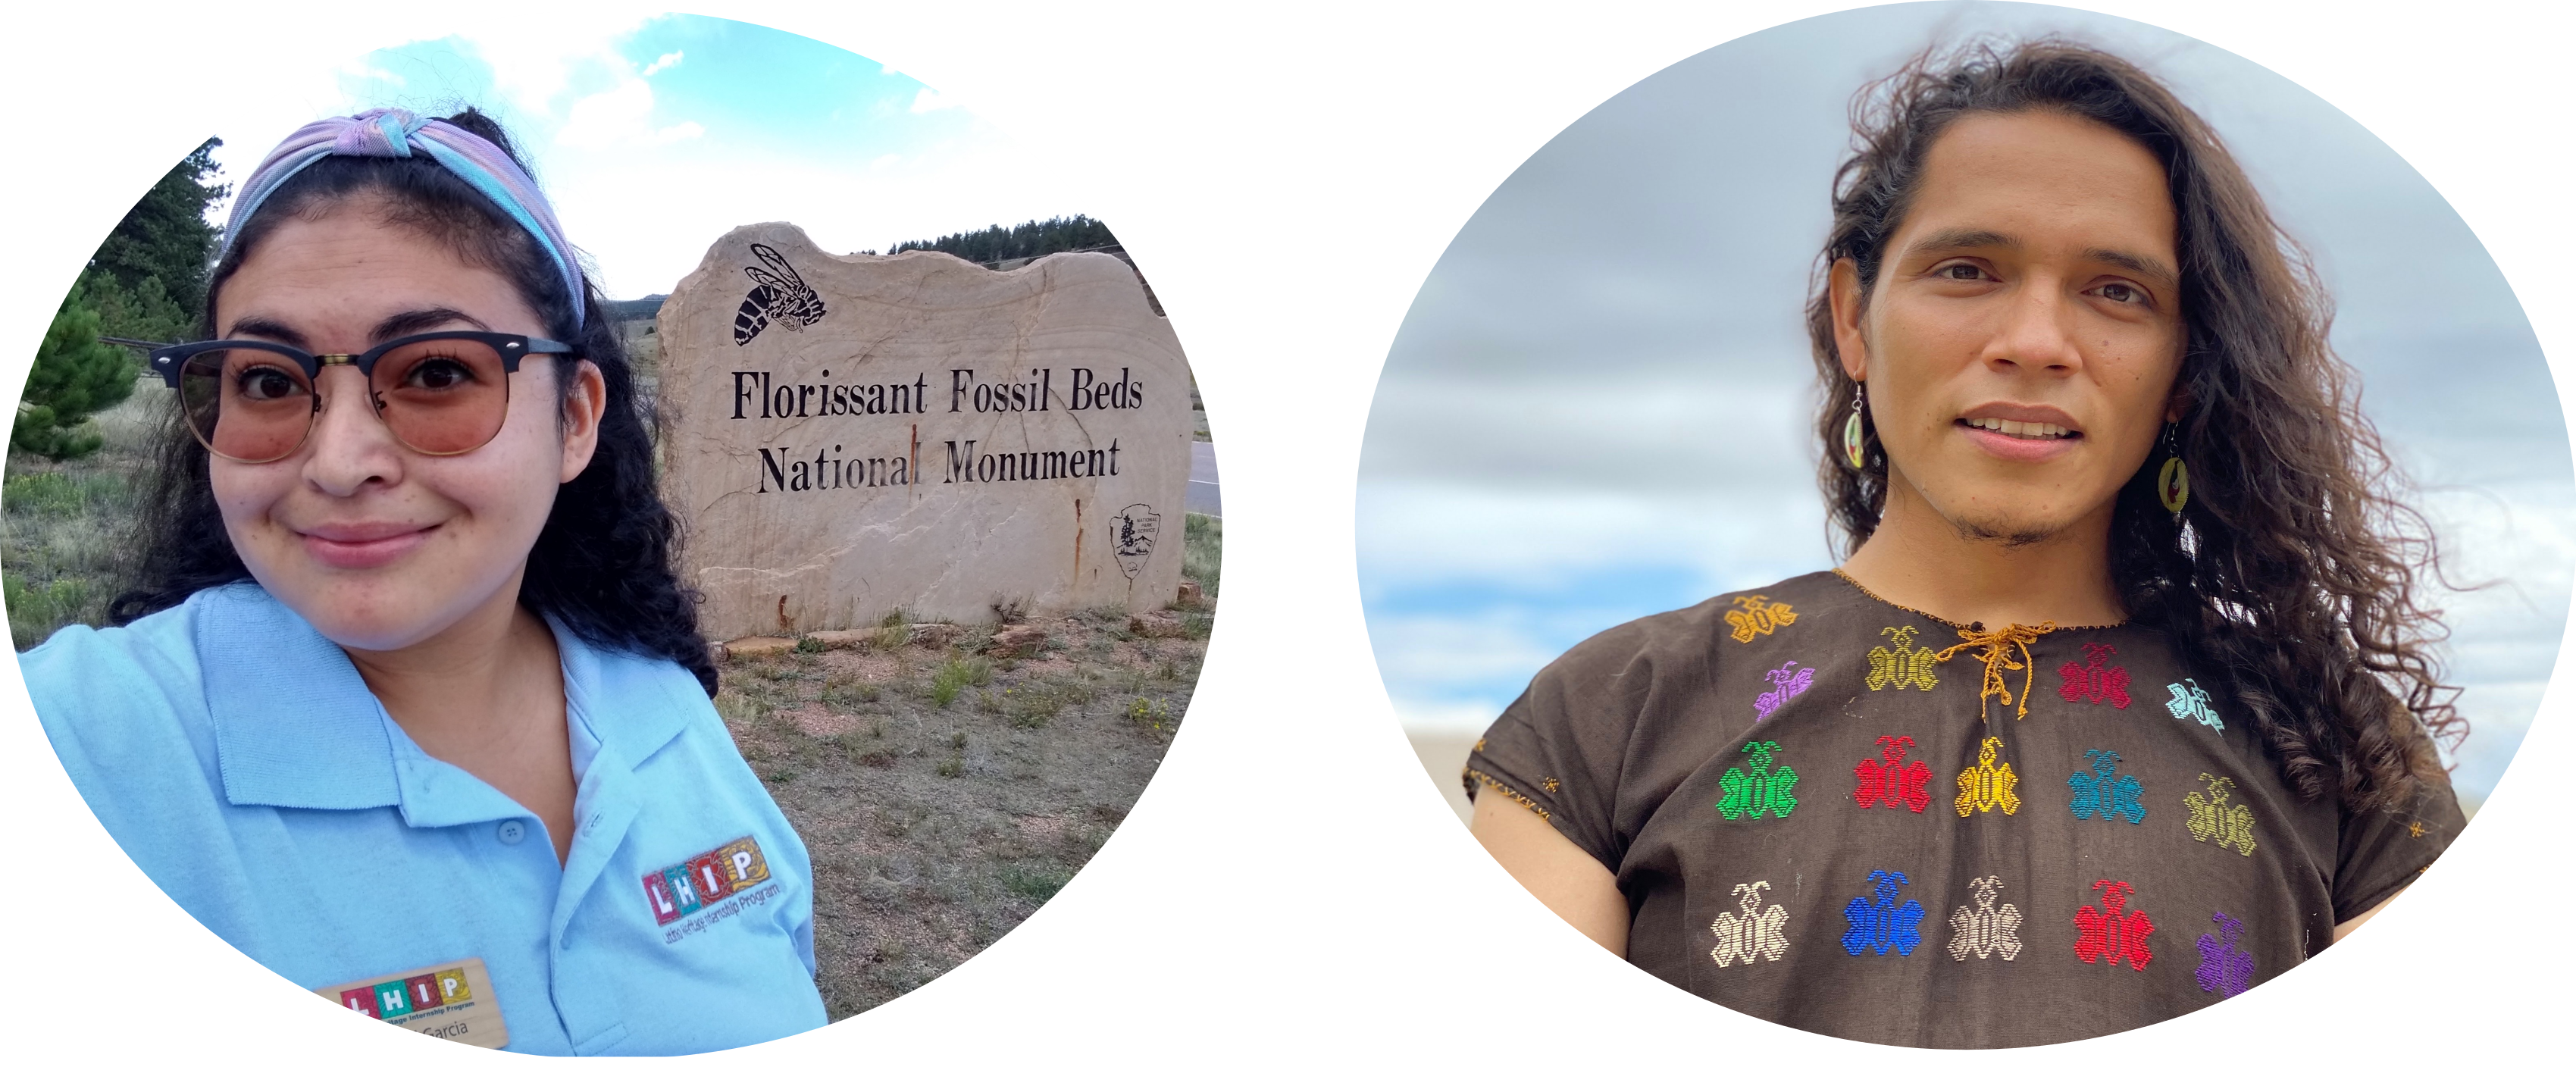 Two young Hispanic people are pictured. On the left is a young woman in a light blue uniform shirt posing in front of the Florissant Fossil Beds sign. On the right is a young man smiling at the camera wearing a black shirt with colorful embroidered bees.